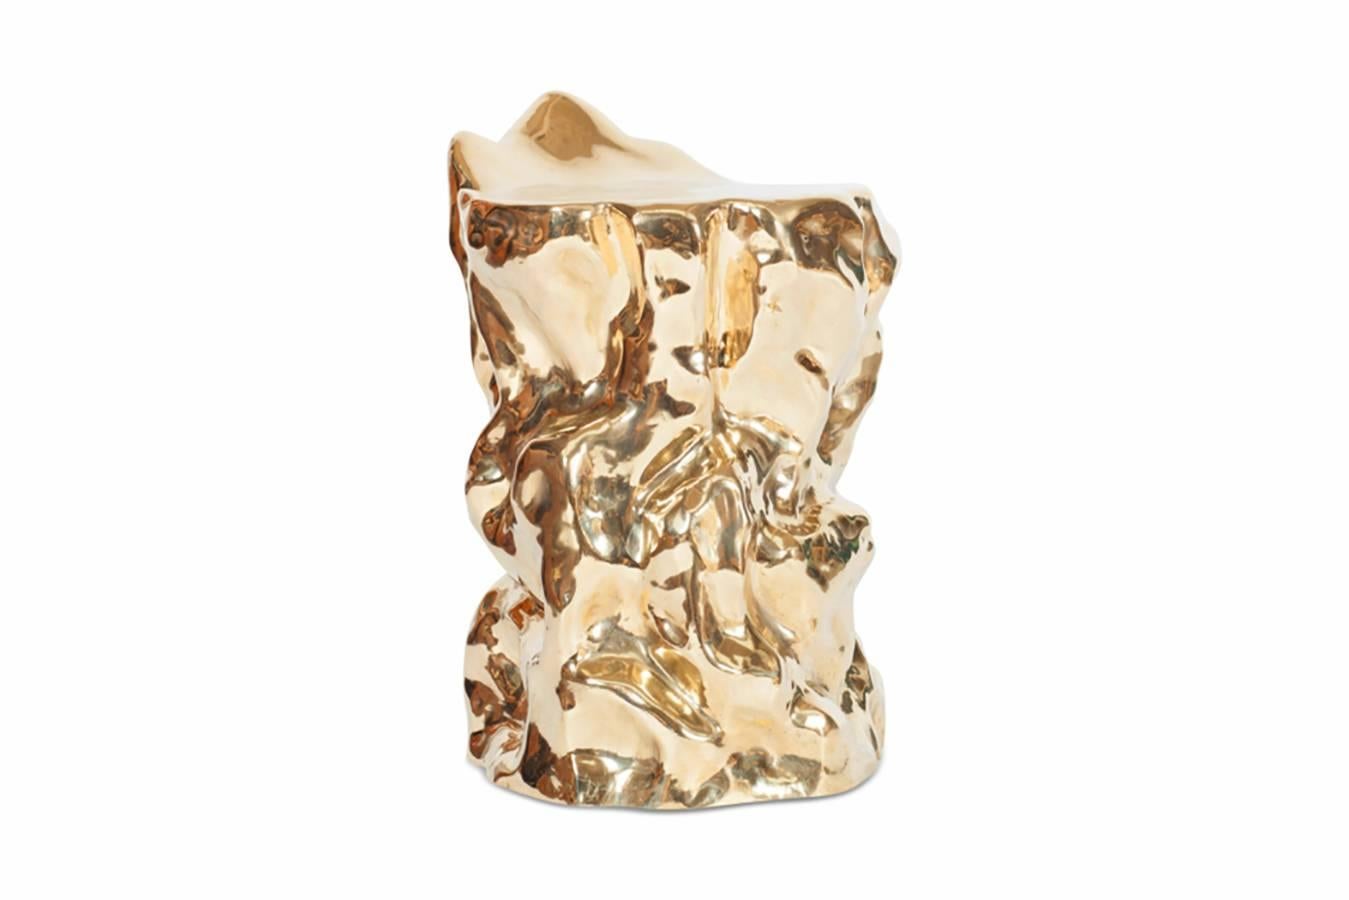 Luxury bronze decorative piece that can be used as stools, side tables or nightstands. Our studio designed these pieces as we see them as a perfect fit without current inventory. An high end luxury item that fits well in a eclectic inspired